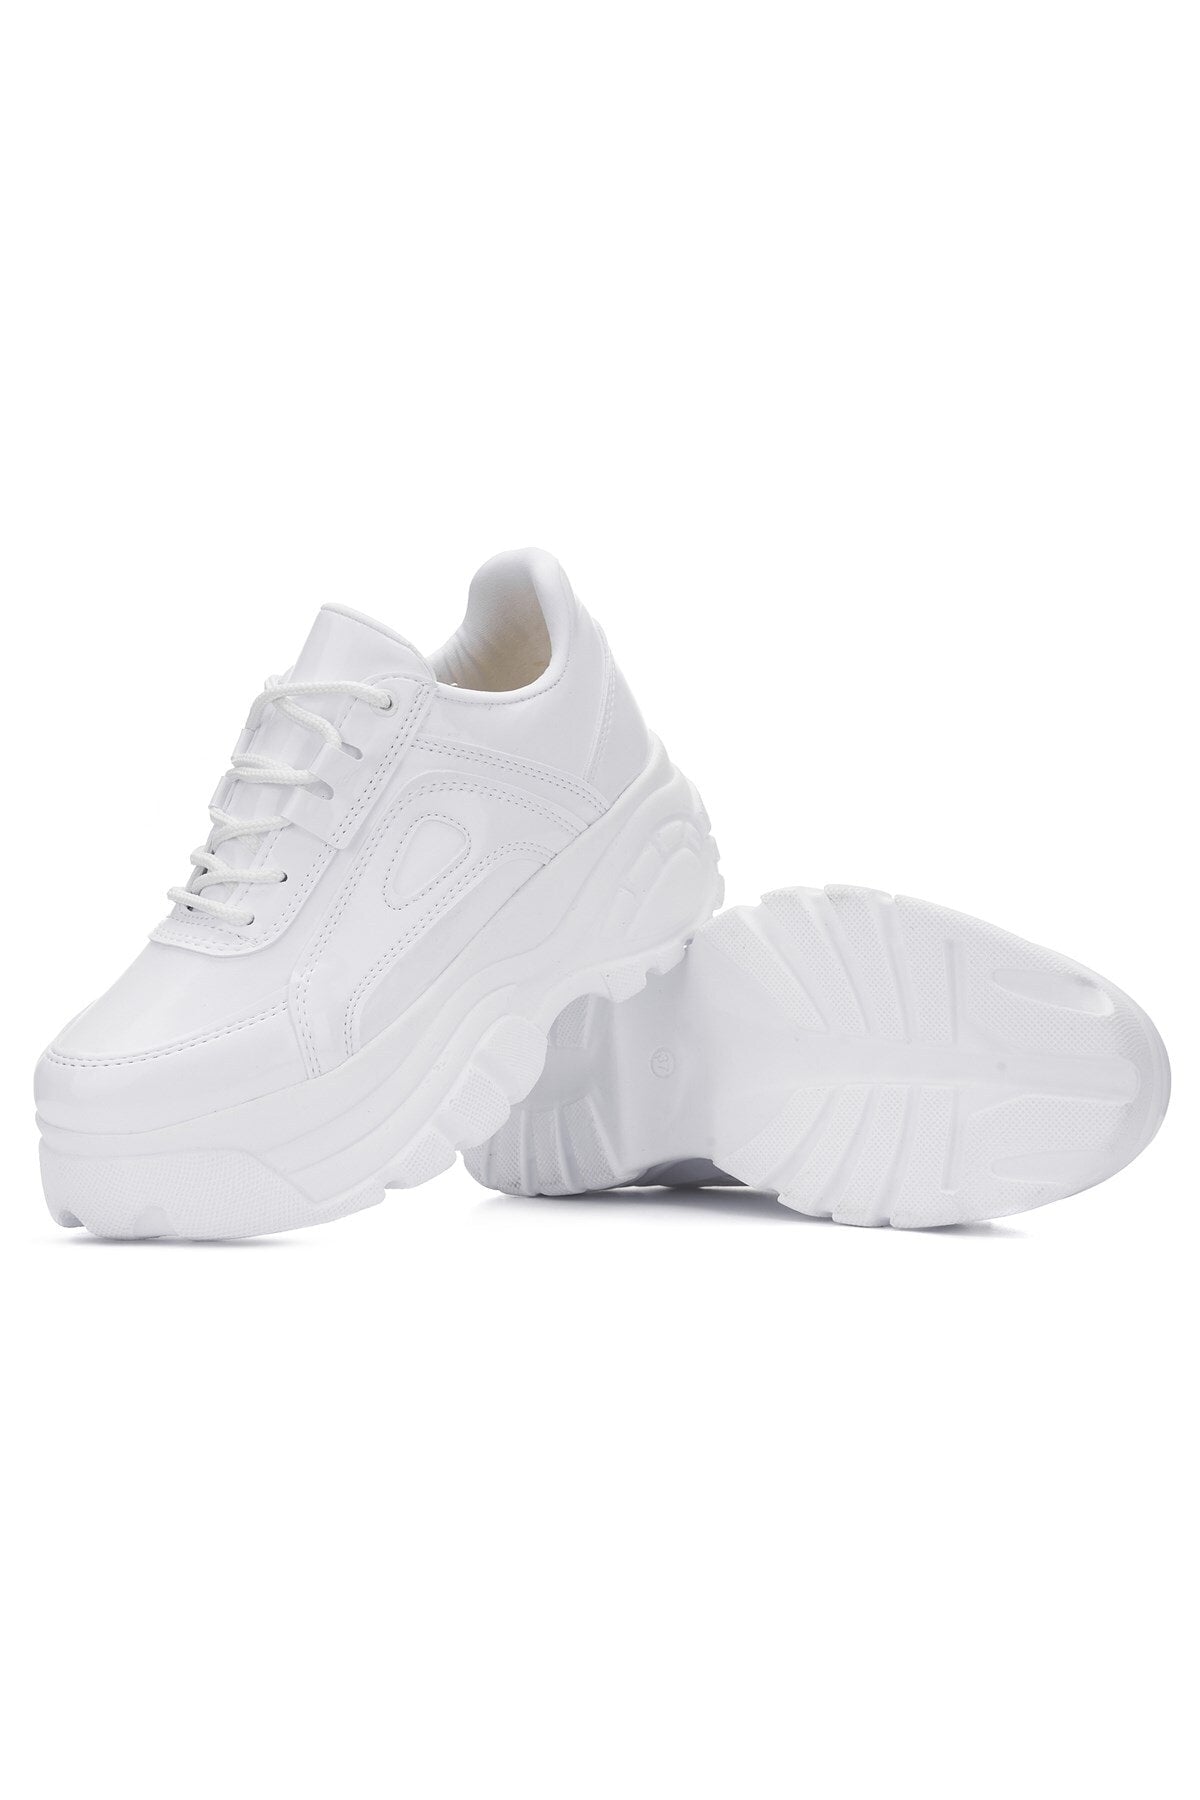 DAILY WOMEN WHITE PLACE SPORTS SHOES HIGH SPEED 6 CM CASHING LIGHT SMEaker 001